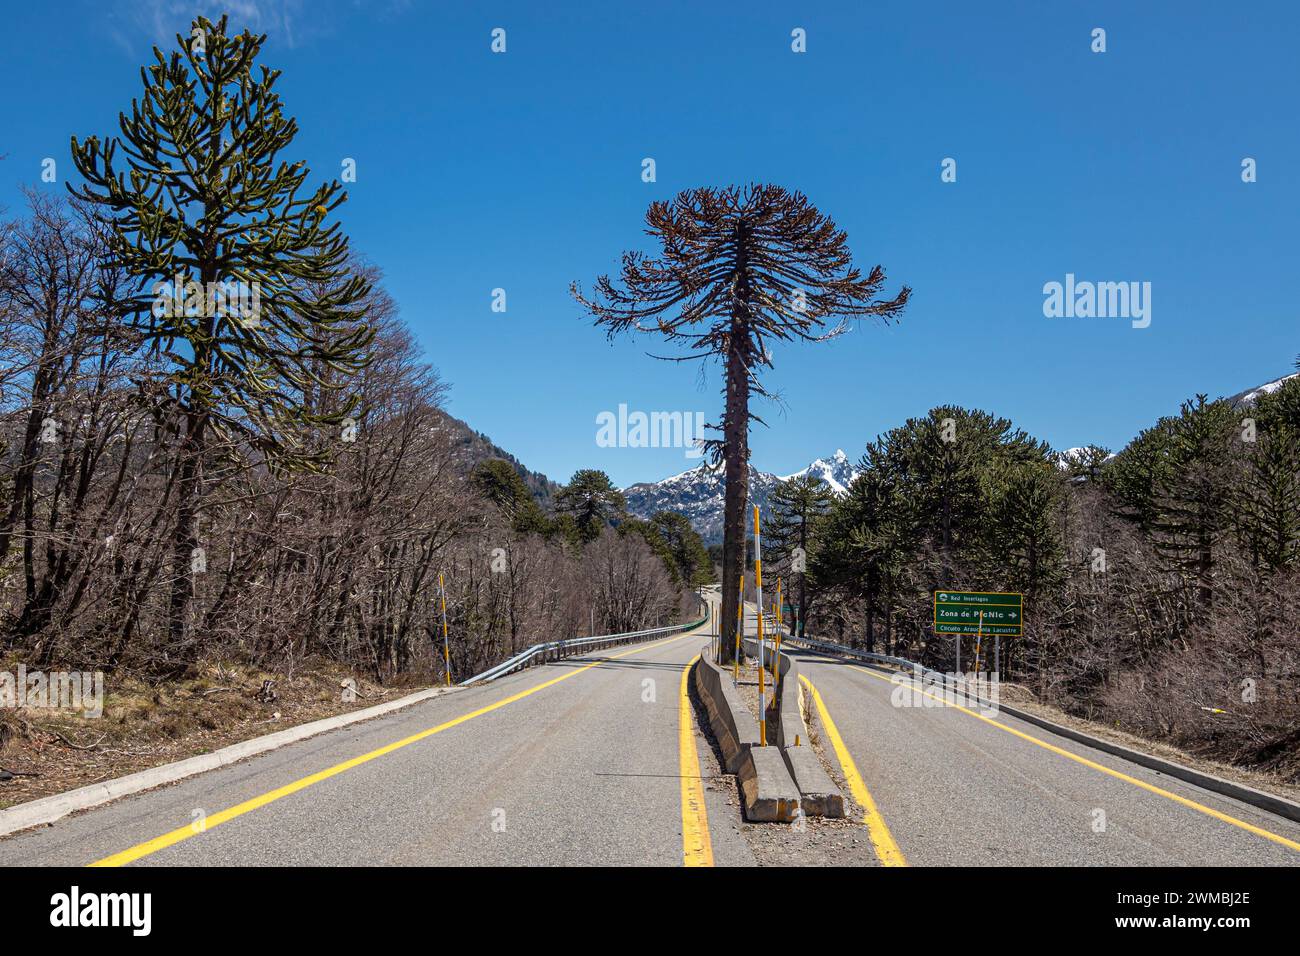 Araucaria forest, single tree divides the road, west of Paso Tromen o Mamuil Malal, Villarica National Park, Chile Stock Photo